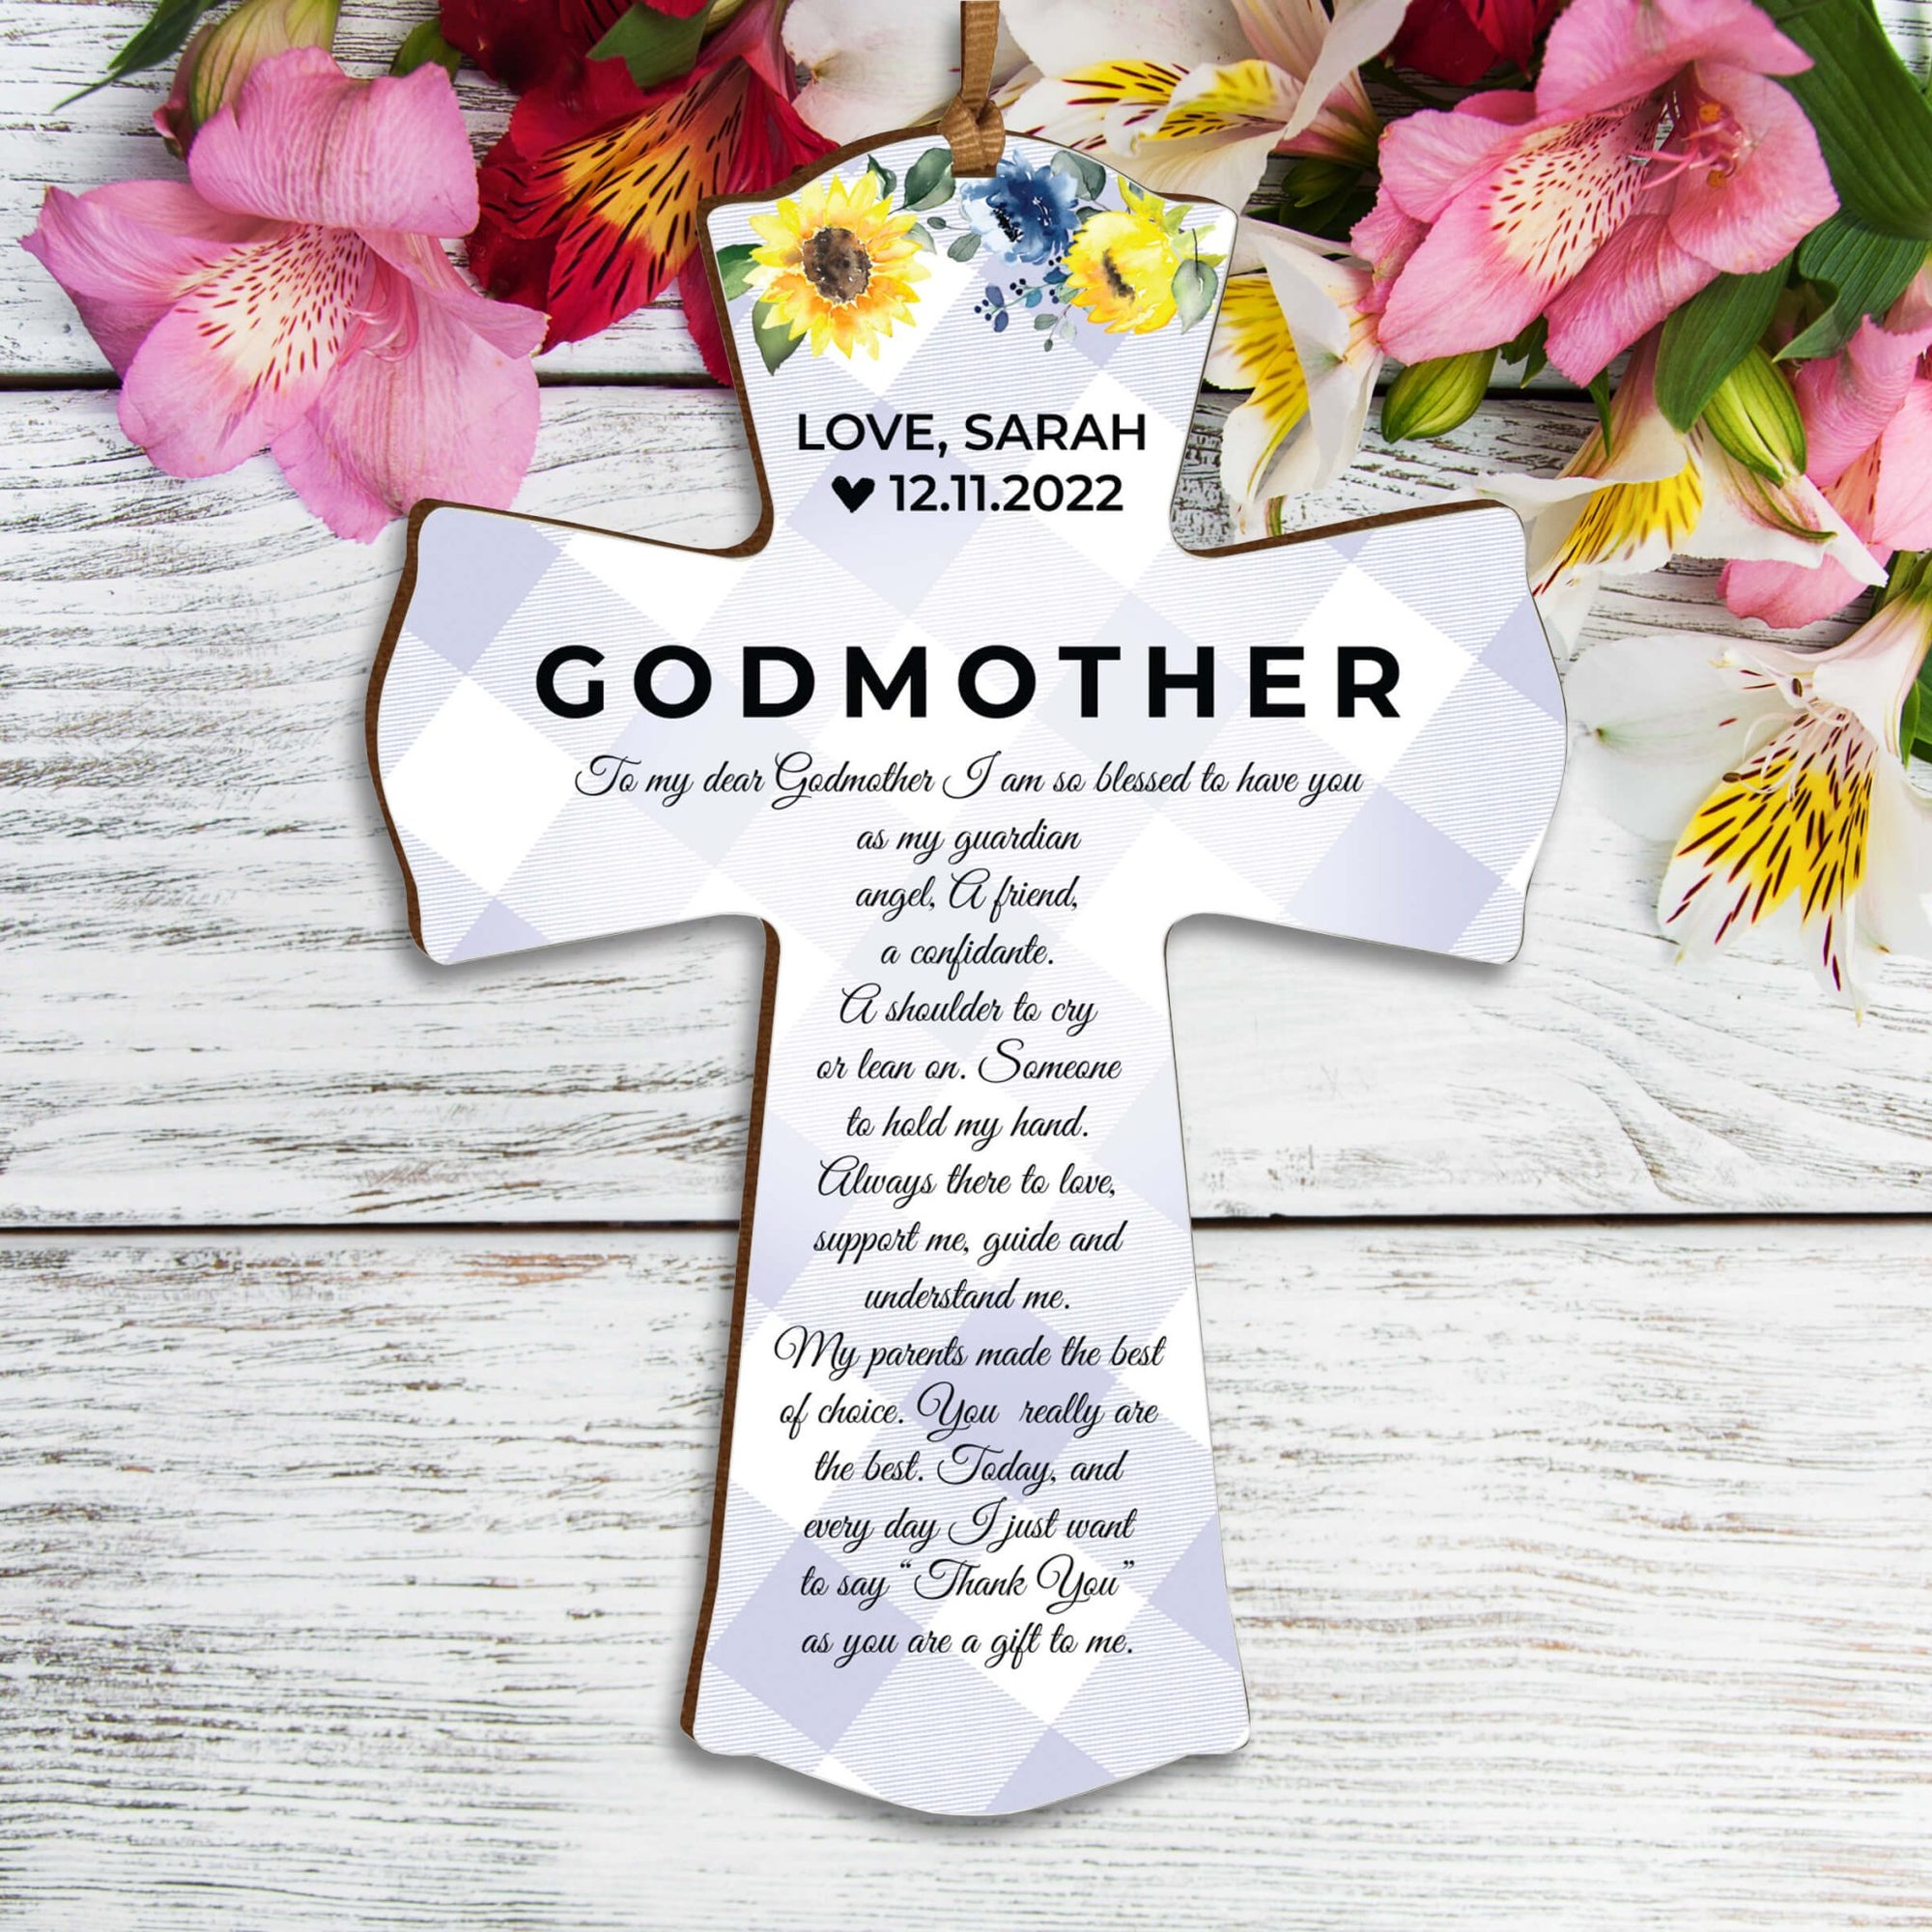 Personalized Wooden Hanging Mini Cross for Godmother - LifeSong Milestones